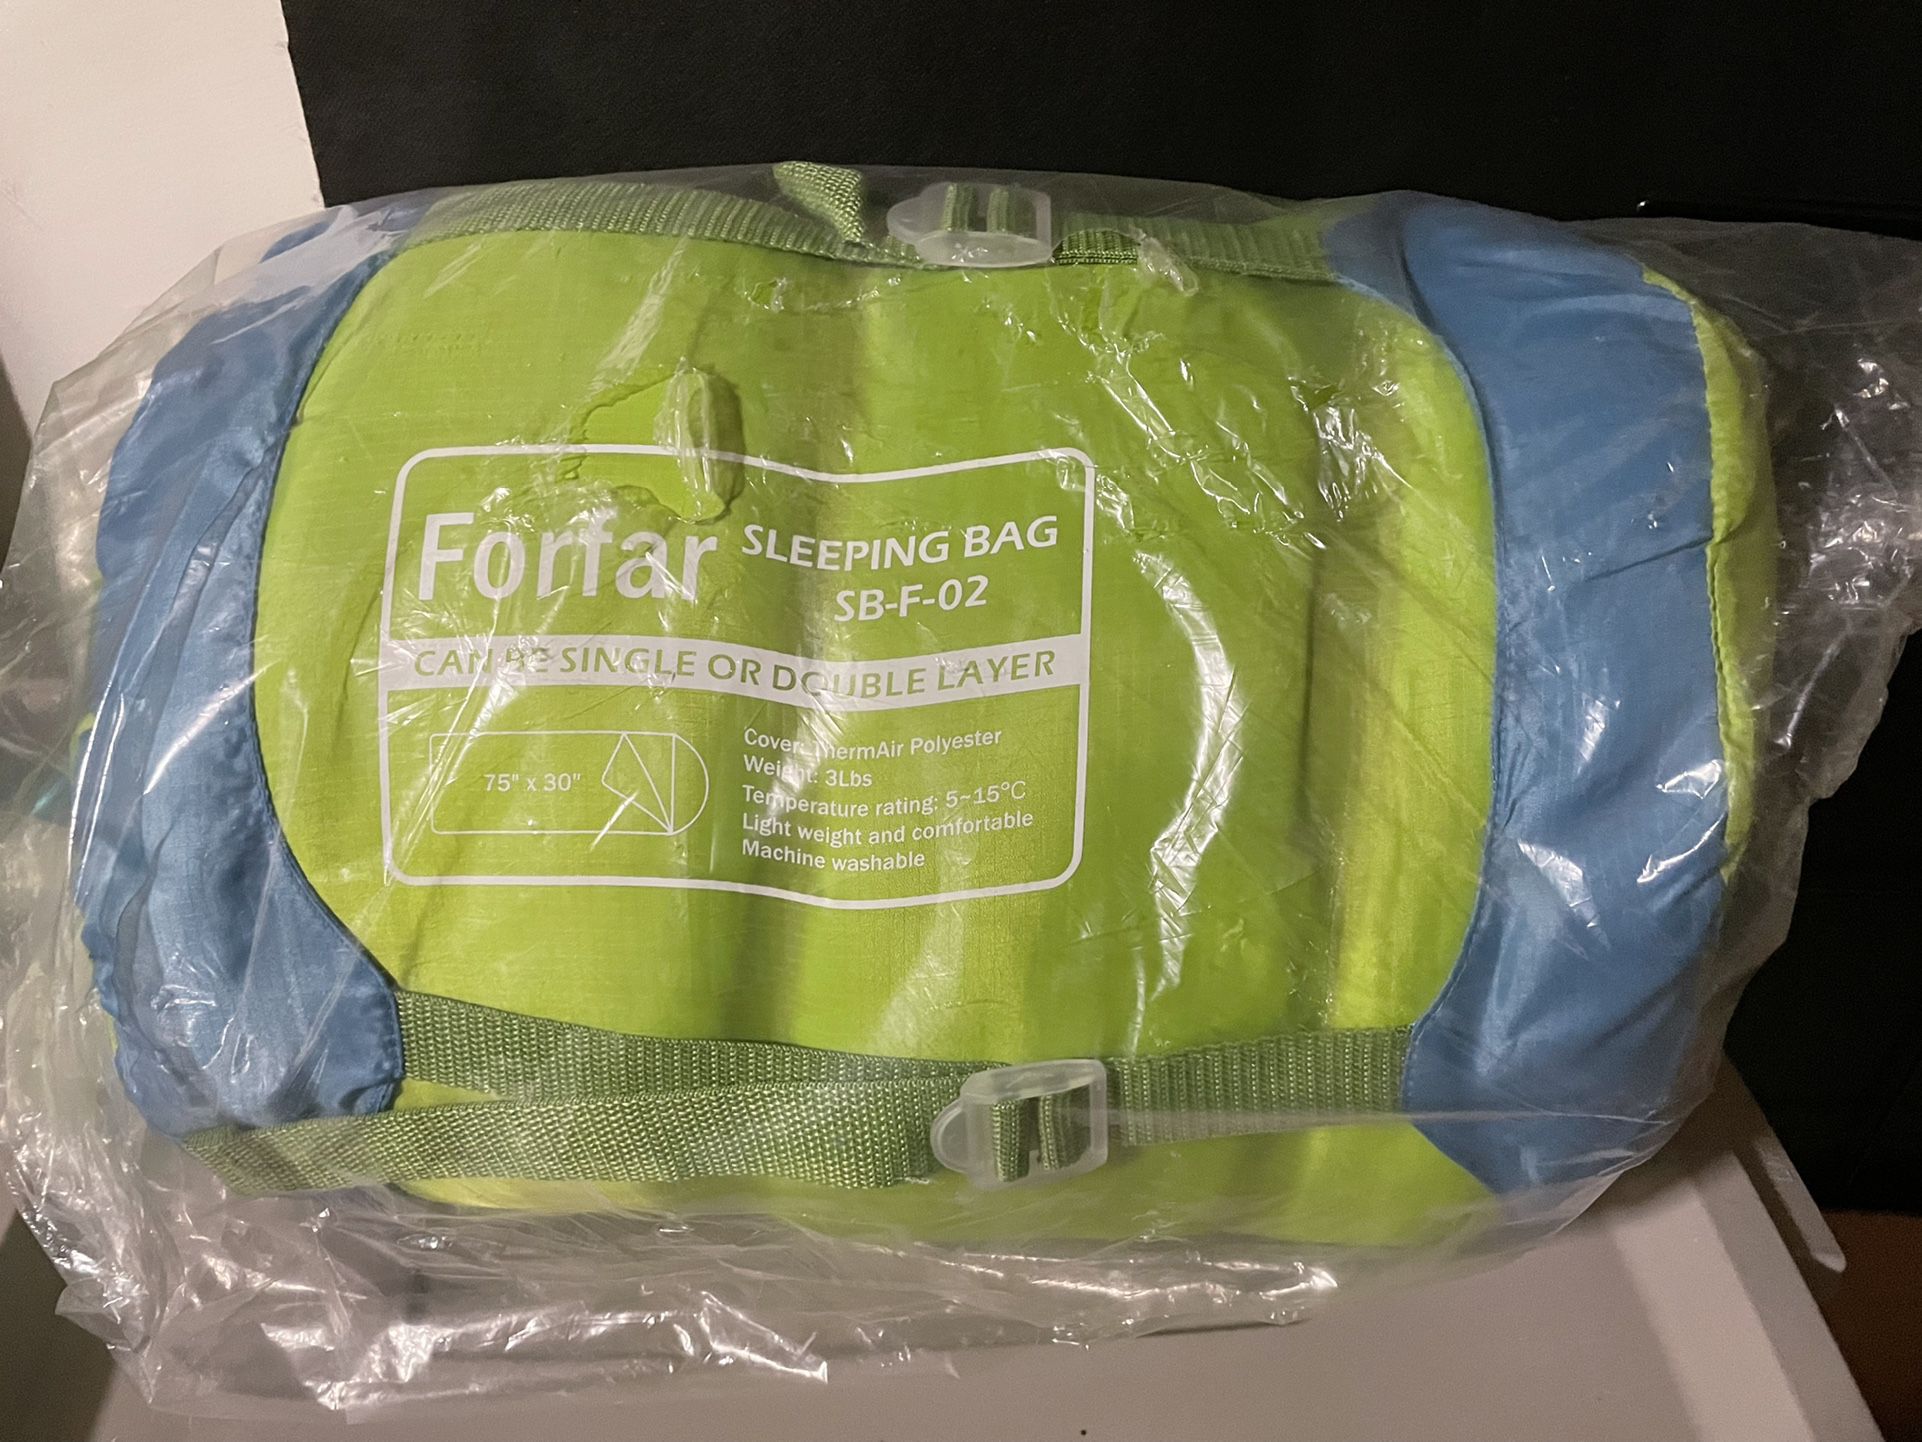 Brand New Forfar Blue & Green Camping Sleeping Bag Rated For Temperatures b/w 5-15 Degrees Celsius 